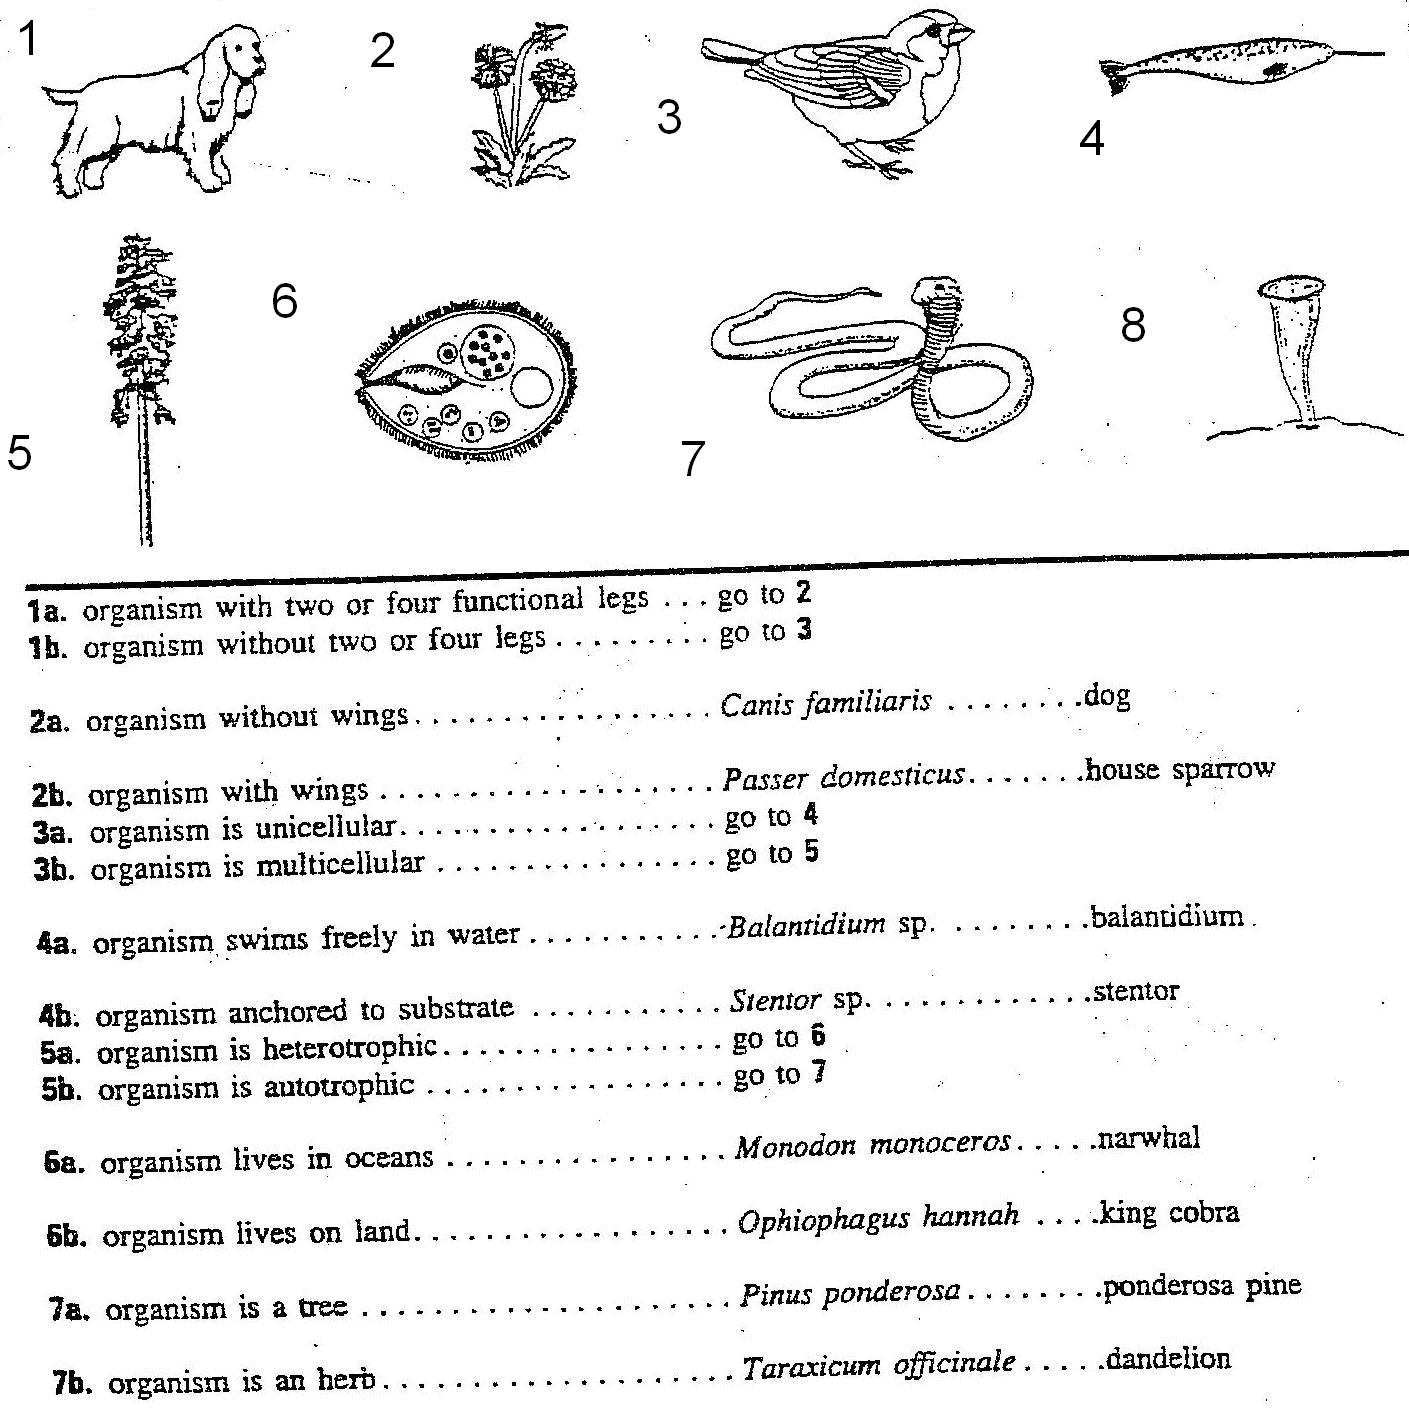 teach-child-how-to-read-7th-grade-science-dichotomous-key-worksheet-answers-pdf